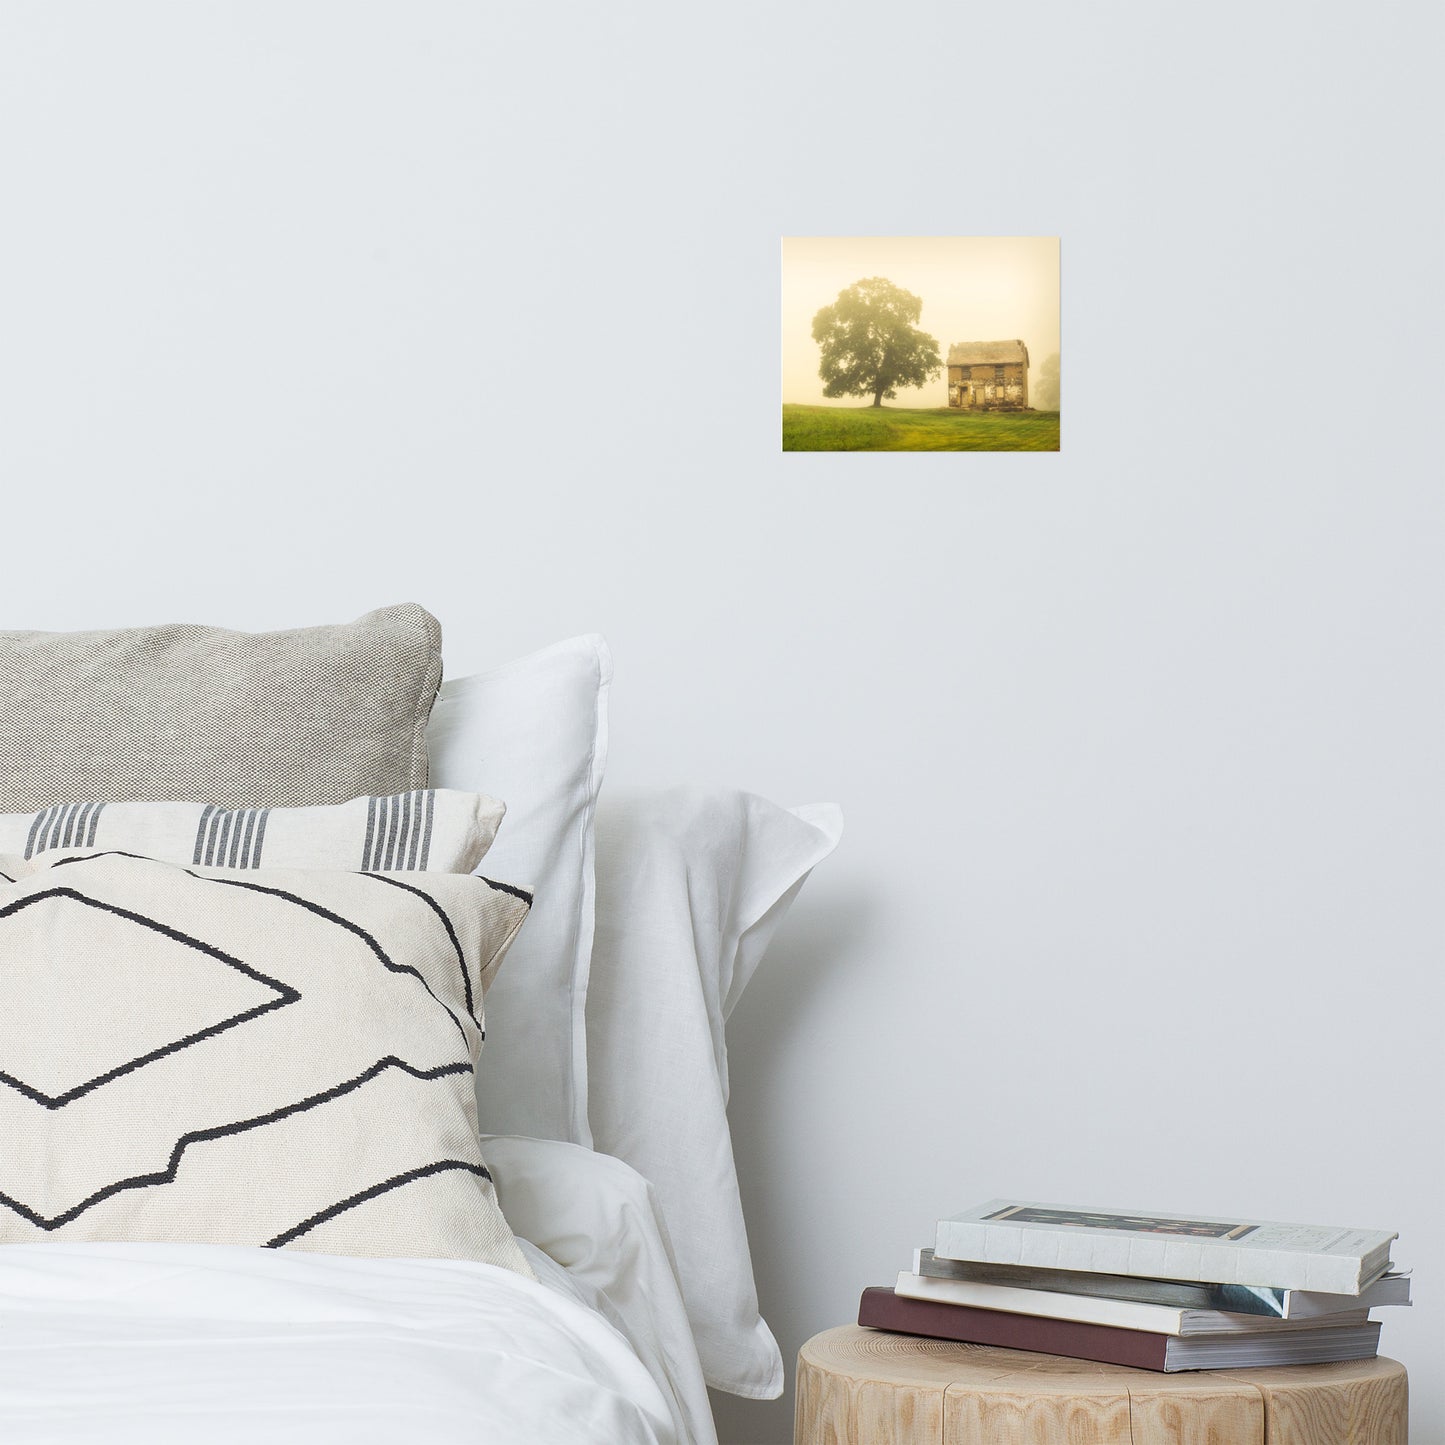 Country Bedroom Wall Art: Old Farmhouse in Foggy Meadow Rustic - Rural / Country Style Landscape / Nature Photograph Loose / Unframed / Frameless / Frameable Wall Art Print - Artwork